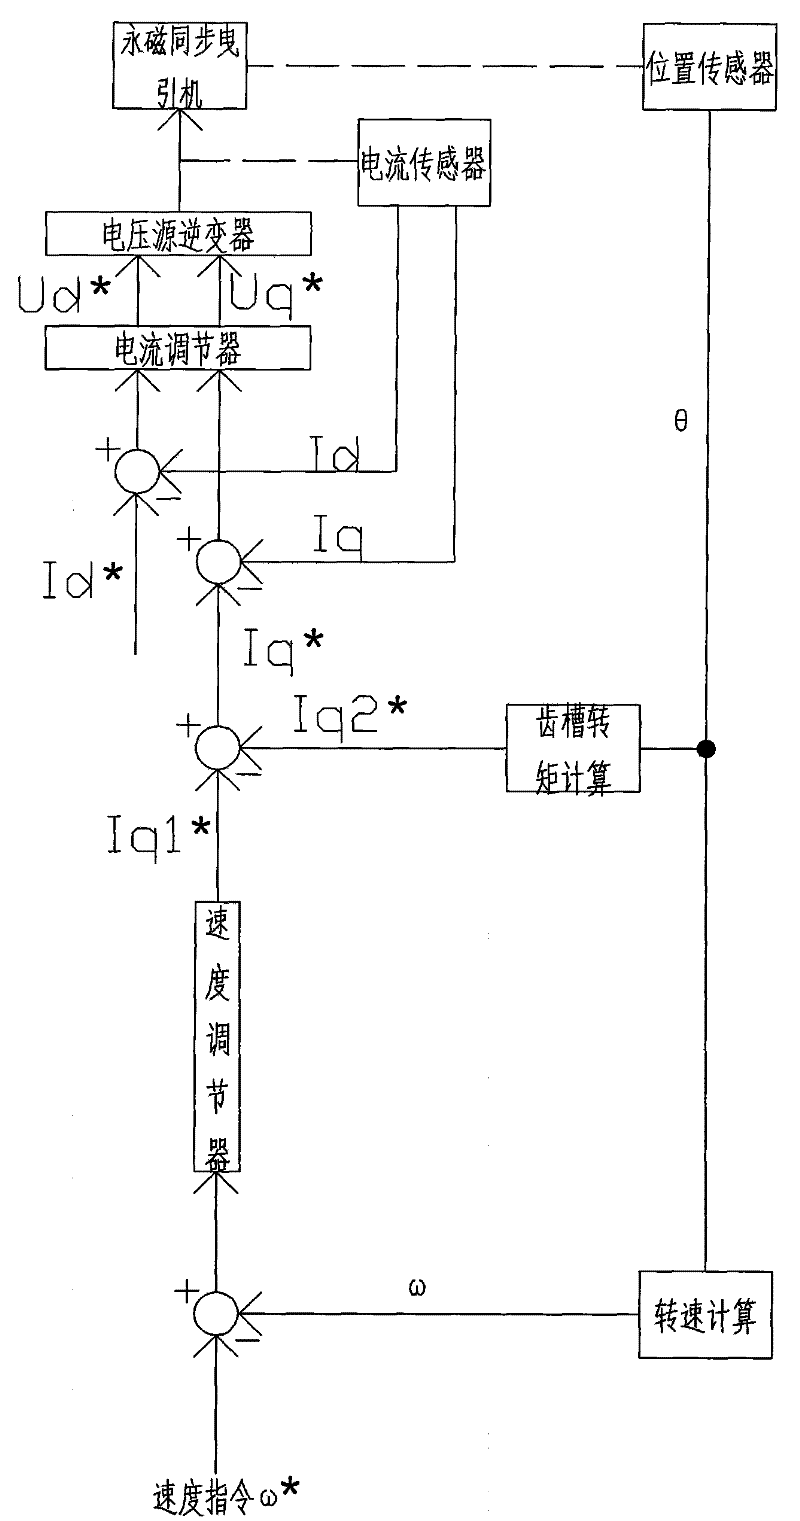 Compensating method of cogging torque of permanent-magnetic synchronous tractor for elevator